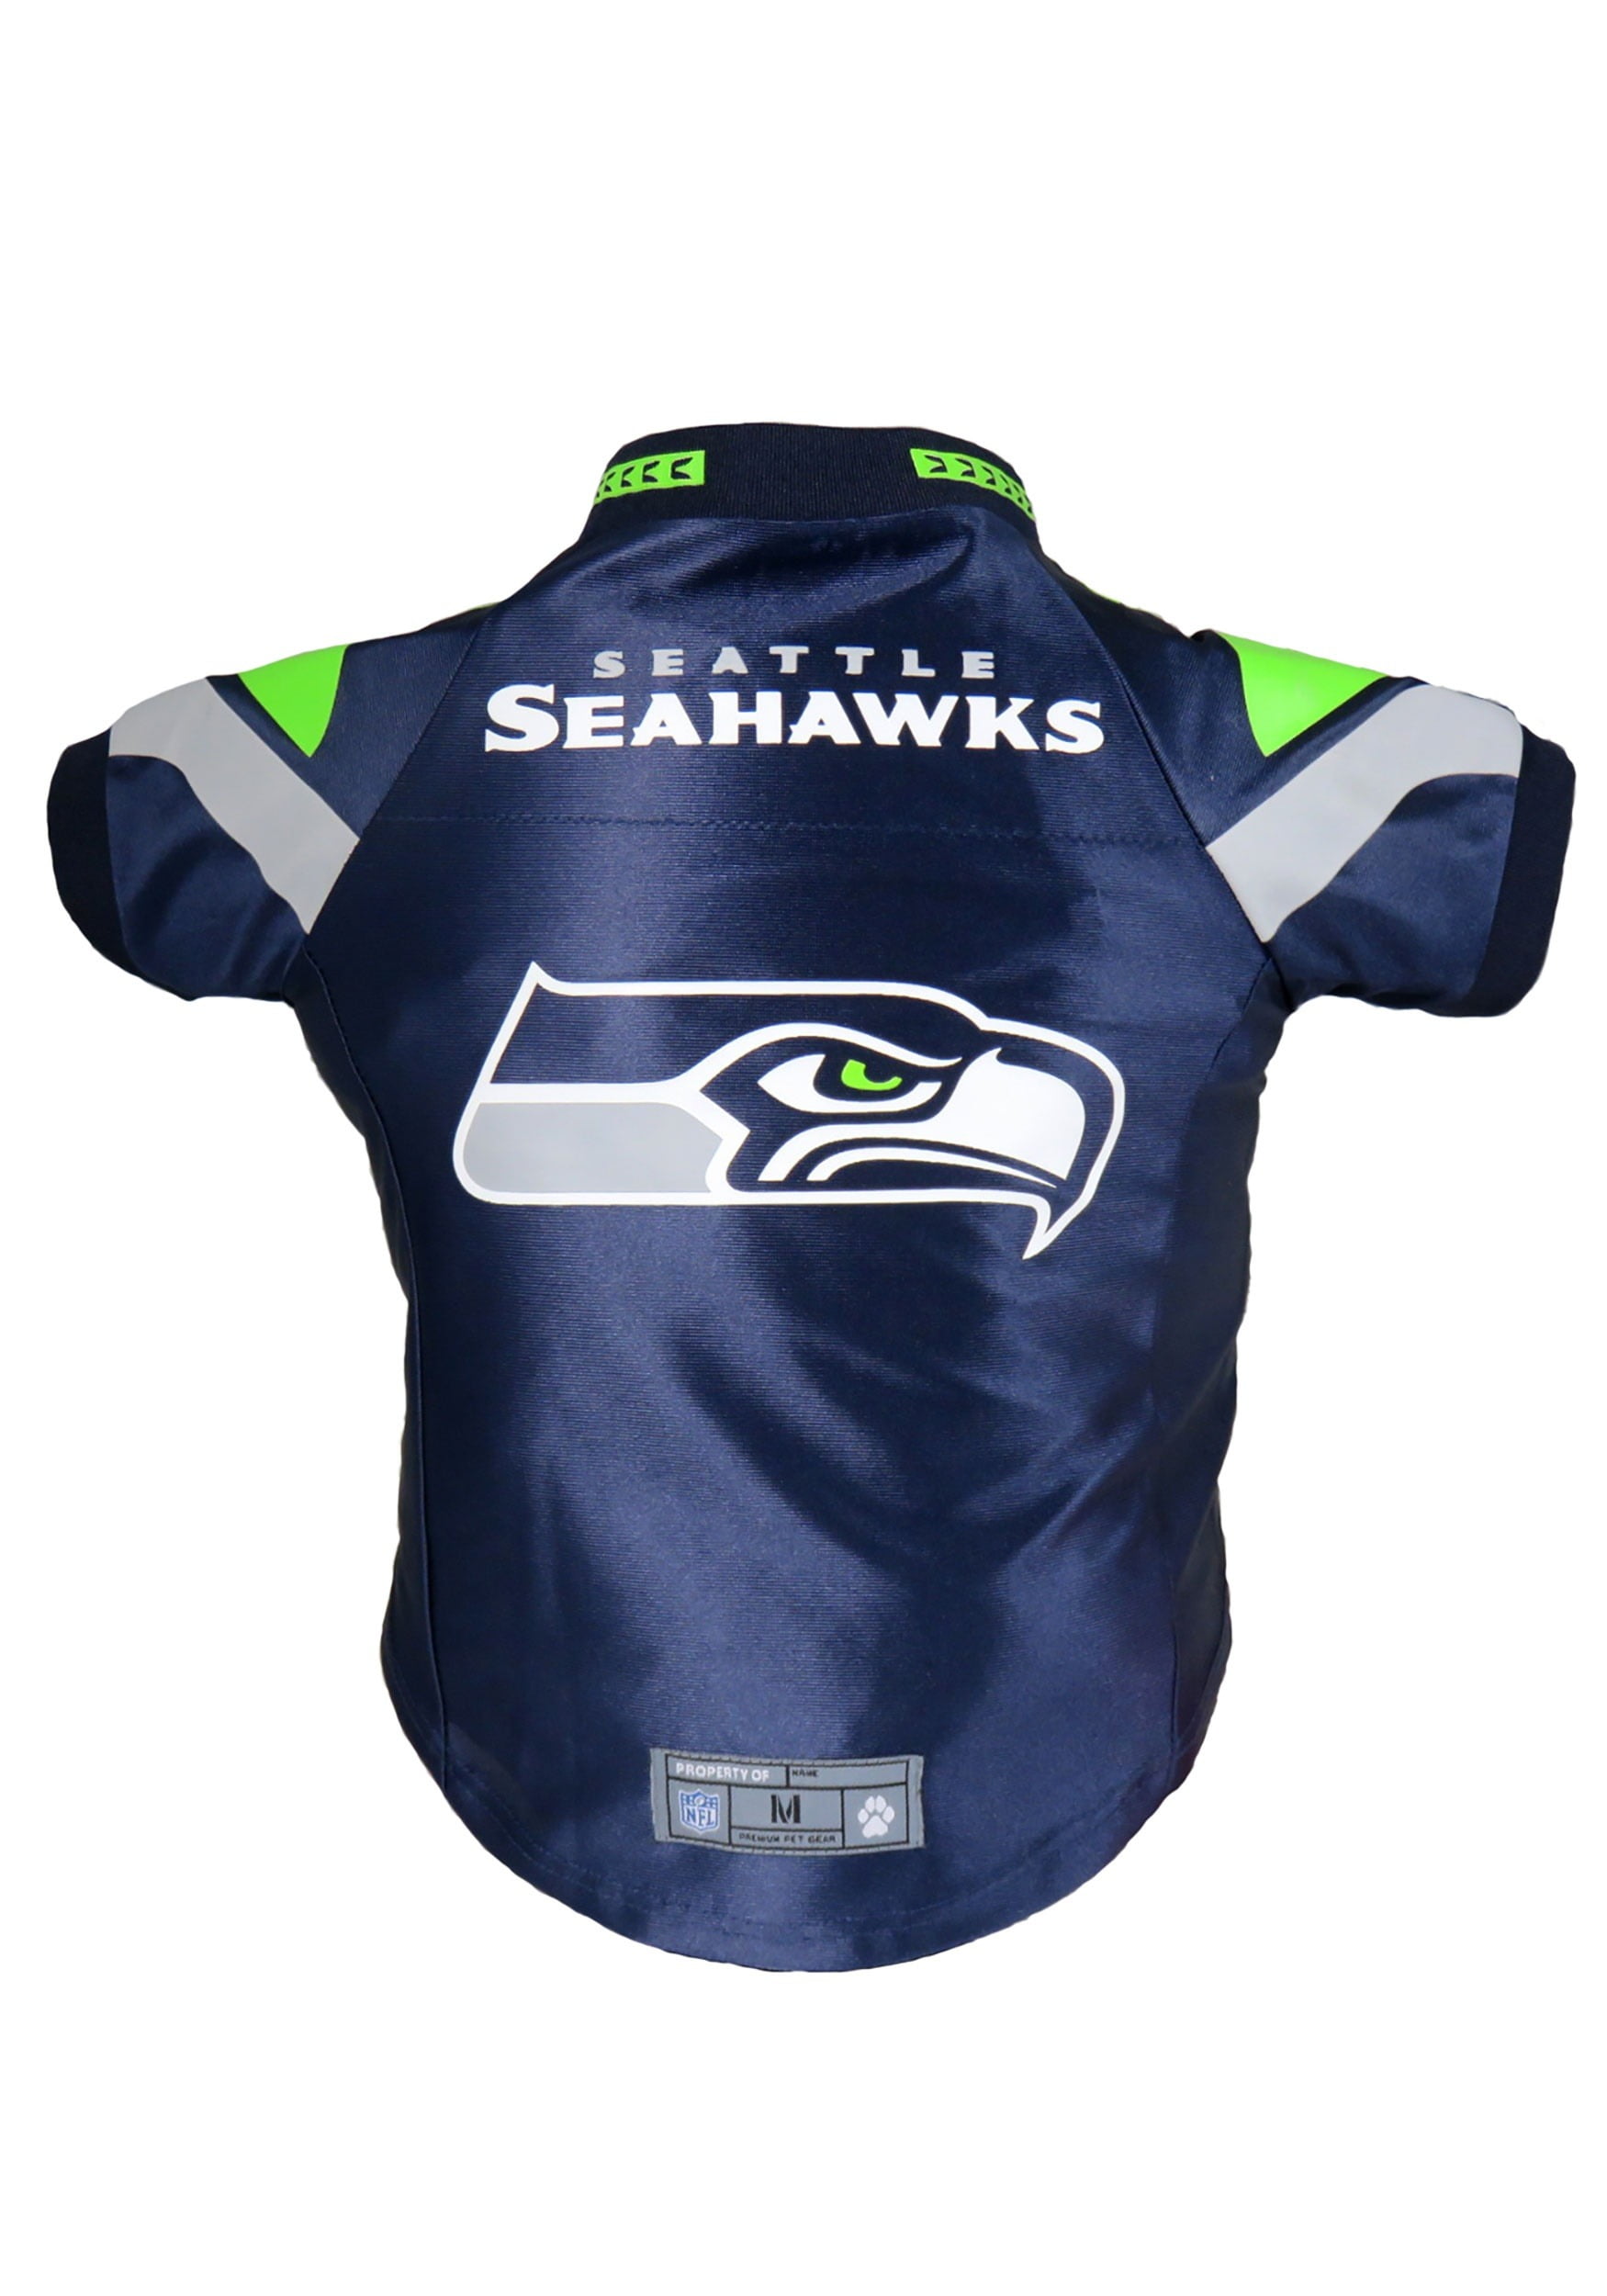 best place to buy seahawks jersey